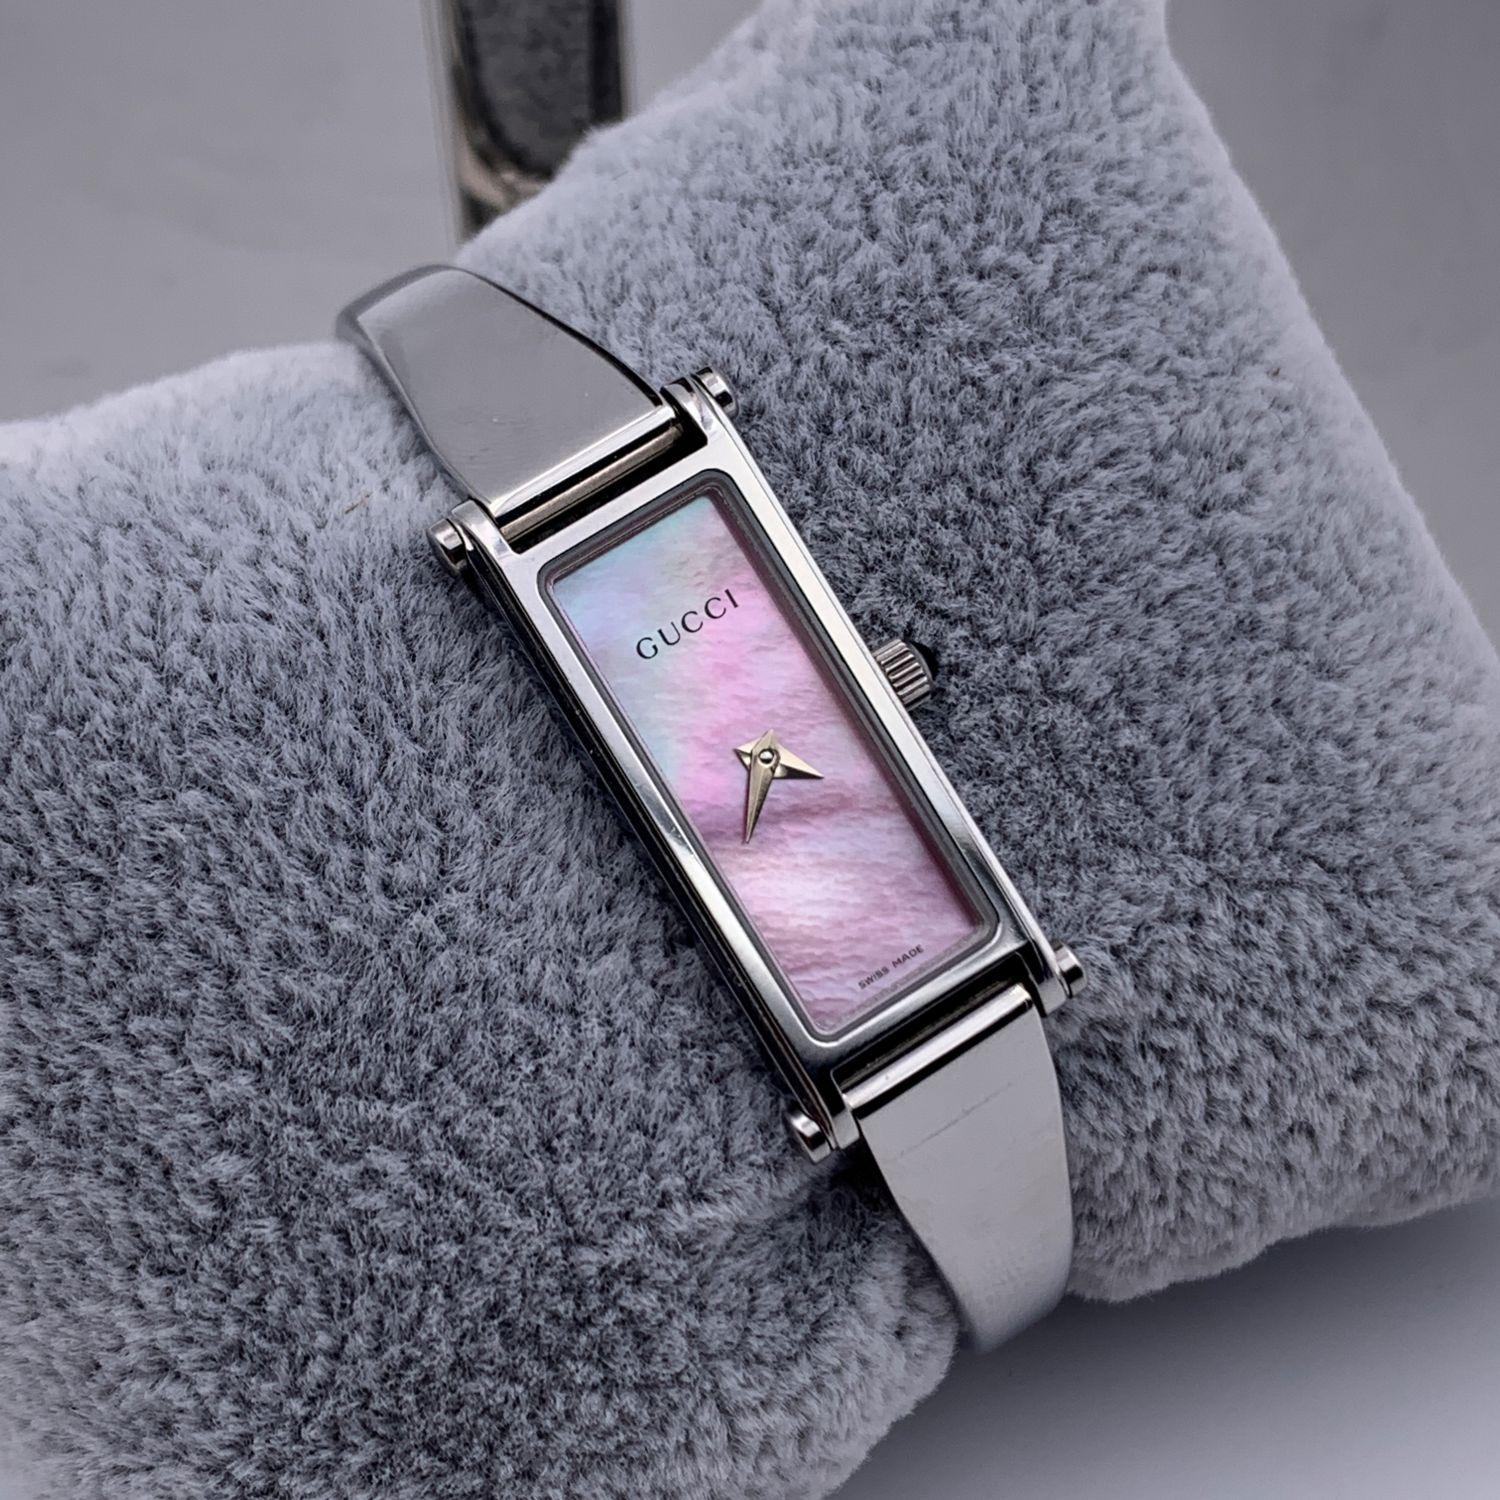 Gucci stainless steel ladies wrist watch. Model 1500L. Stainless steel case. Quartz movement. Water Resistant (up to 3 ATM). Mother of pearl pink dial. Swiss Made. Gucci written on the face, clasp & reverse. Clasp with snap closure (see images).